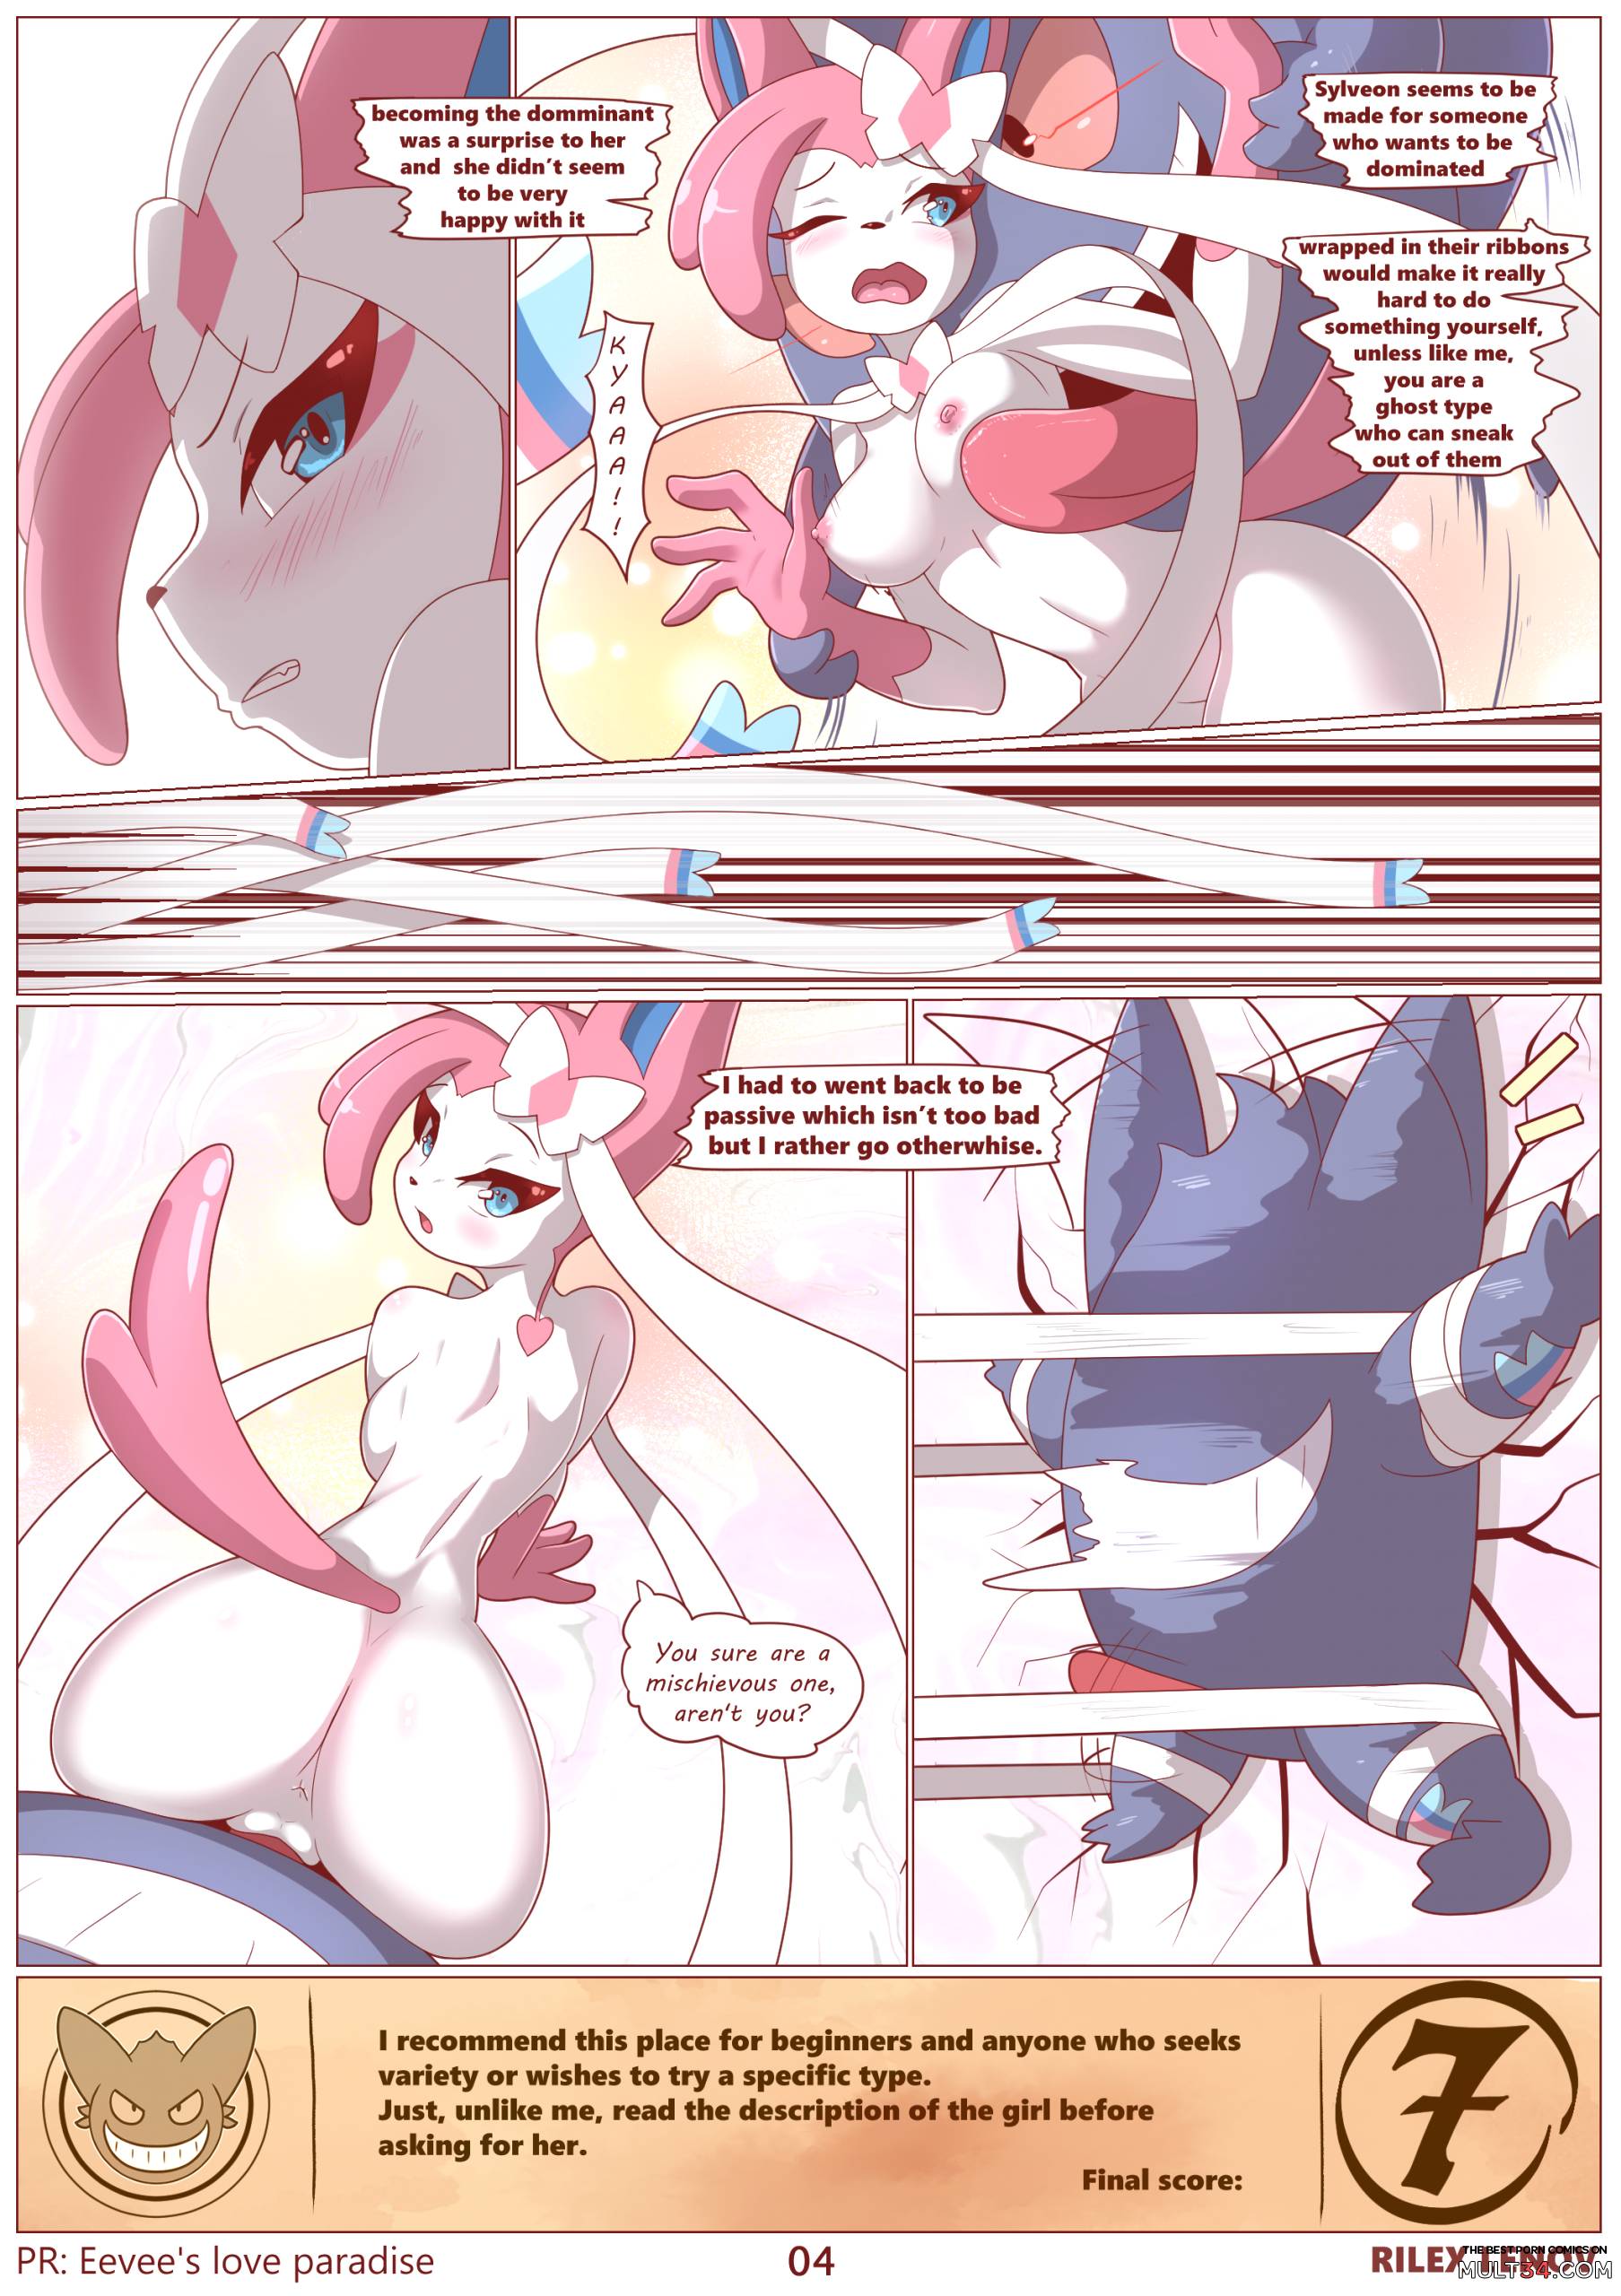 Eevee's love paradise page 5